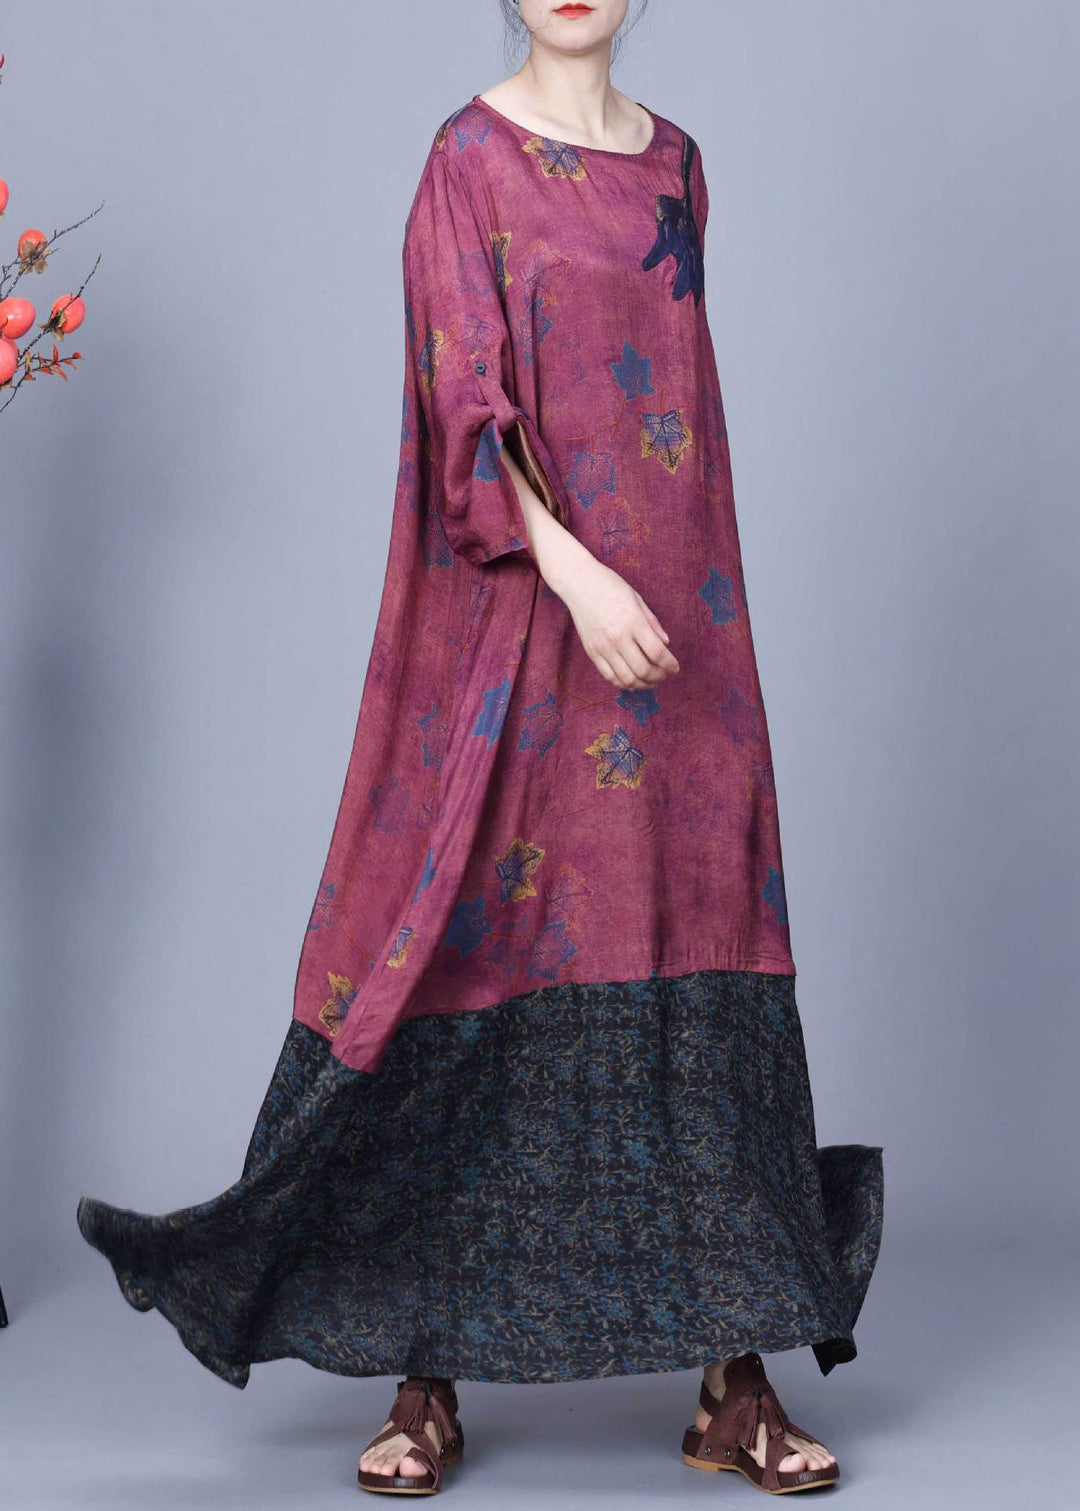 French Purple Red Print Pockets Patchwork Cotton Long Dresses Spring